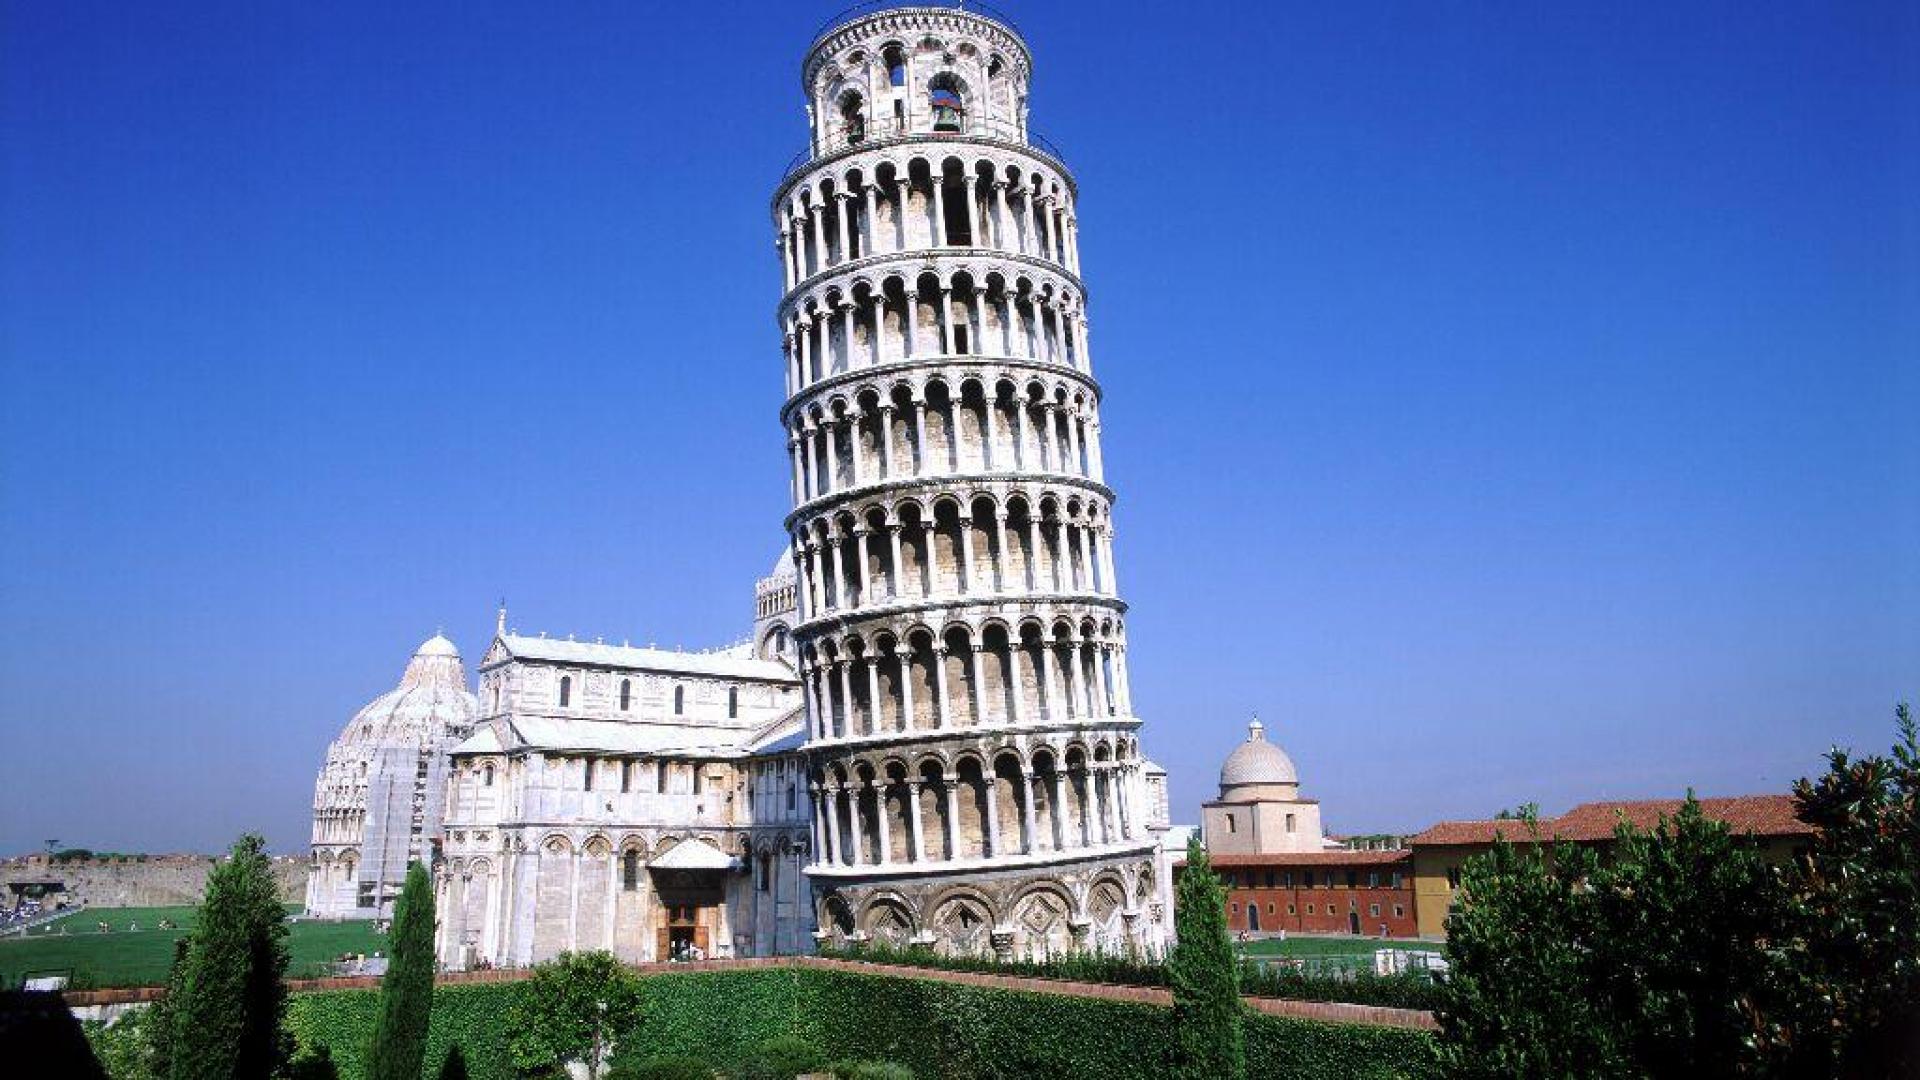 Leaning Tower of Pisa - Italy Travel Guide